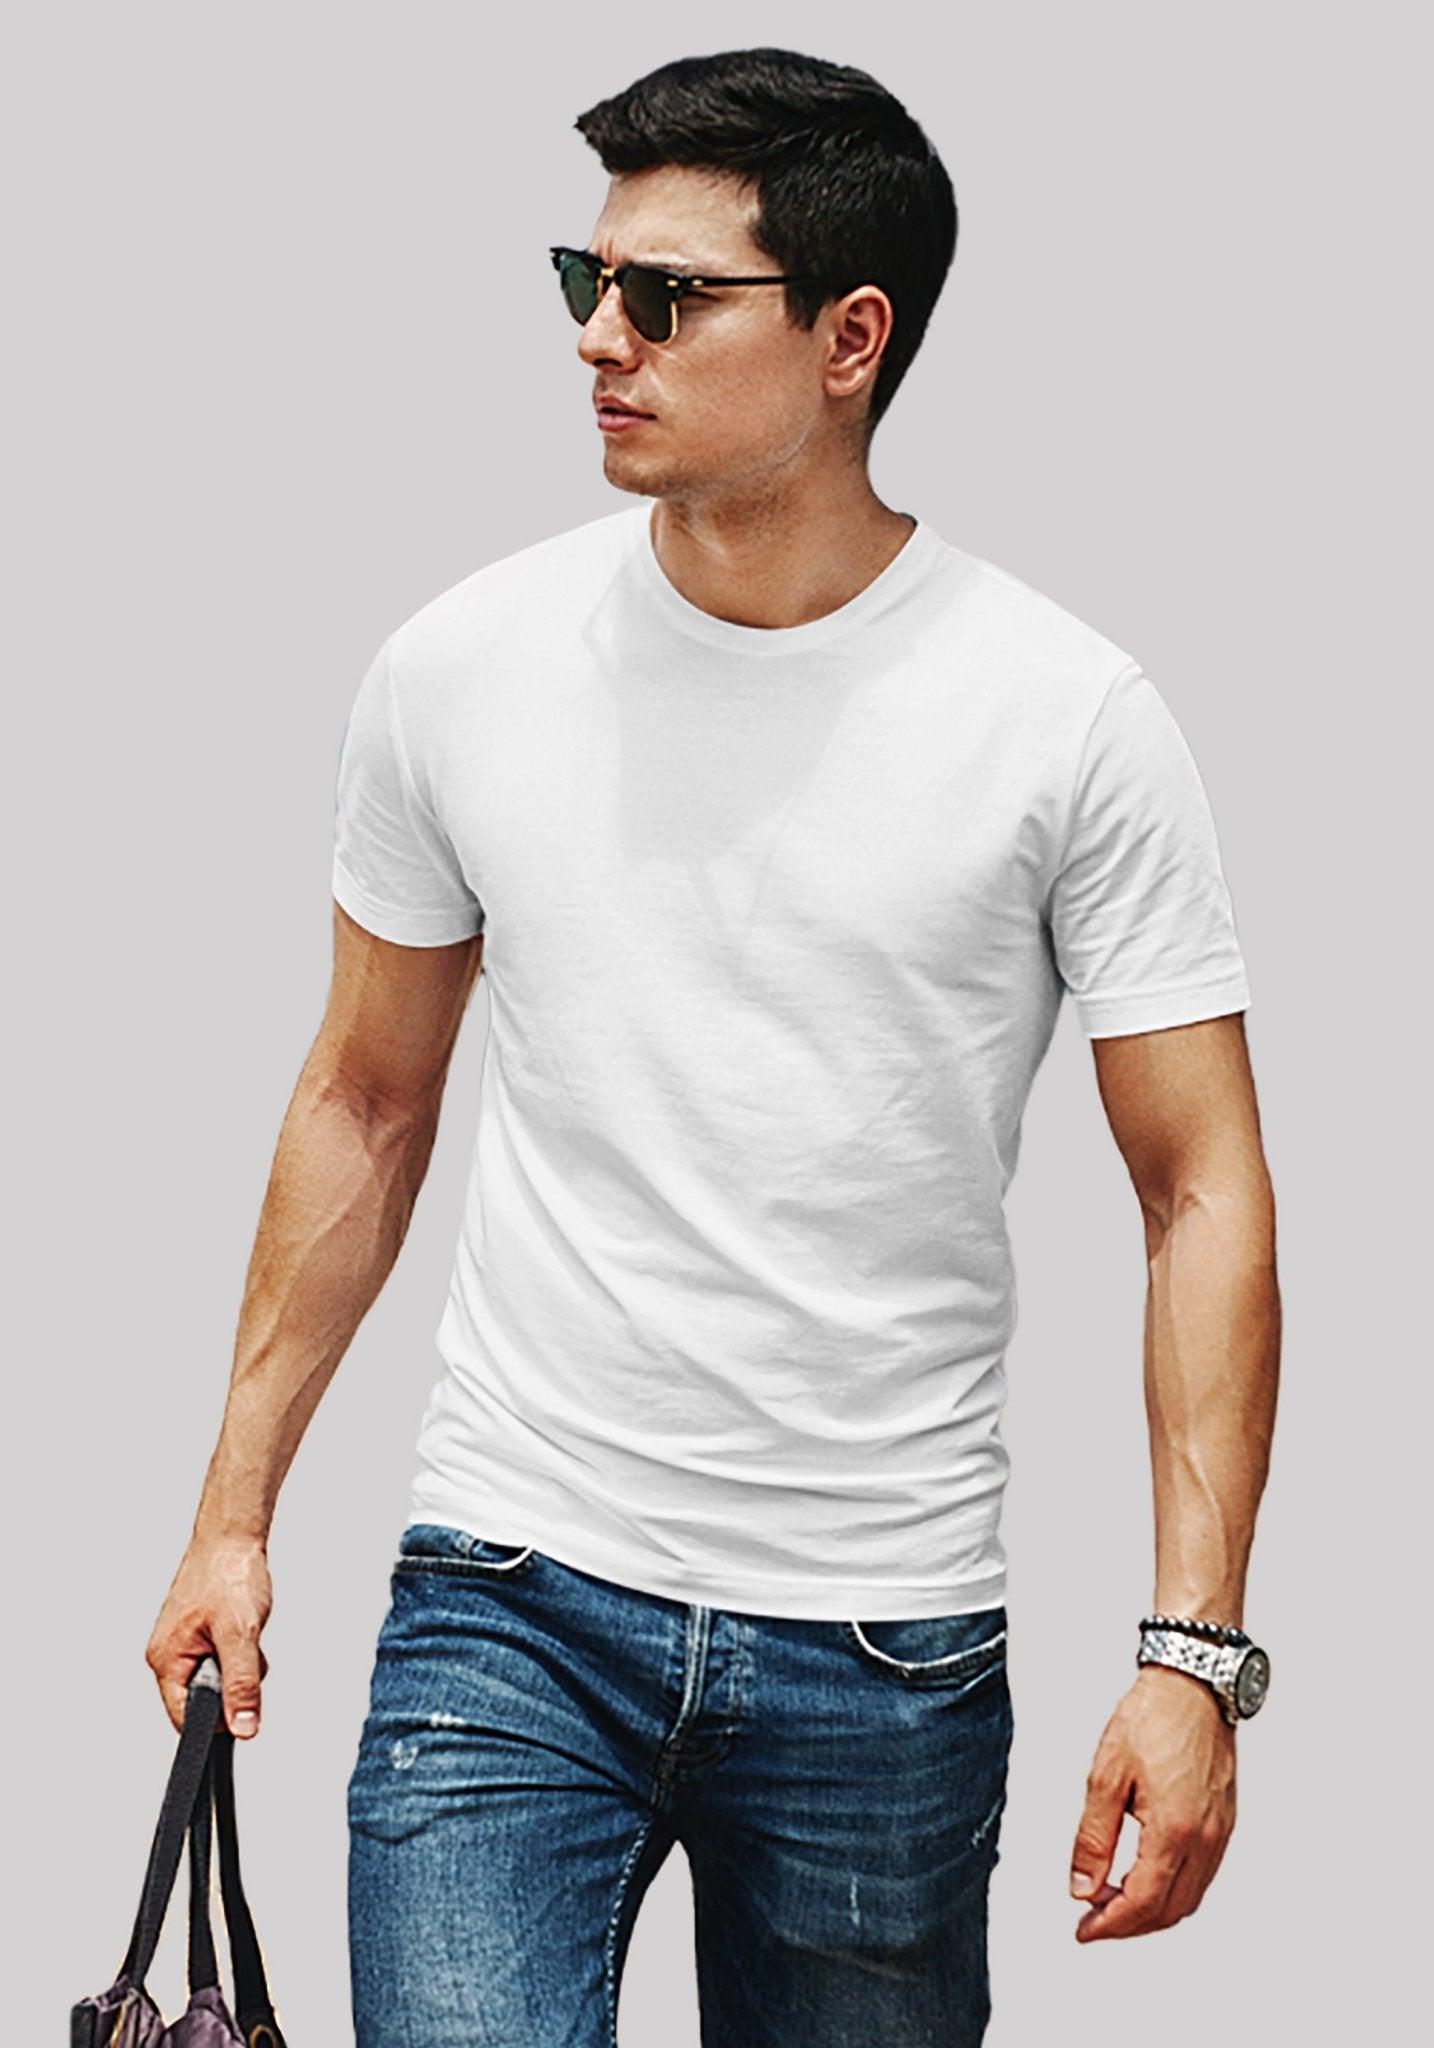 Solid Plain T Shirt Combo For Men In Bright White Colour Variant